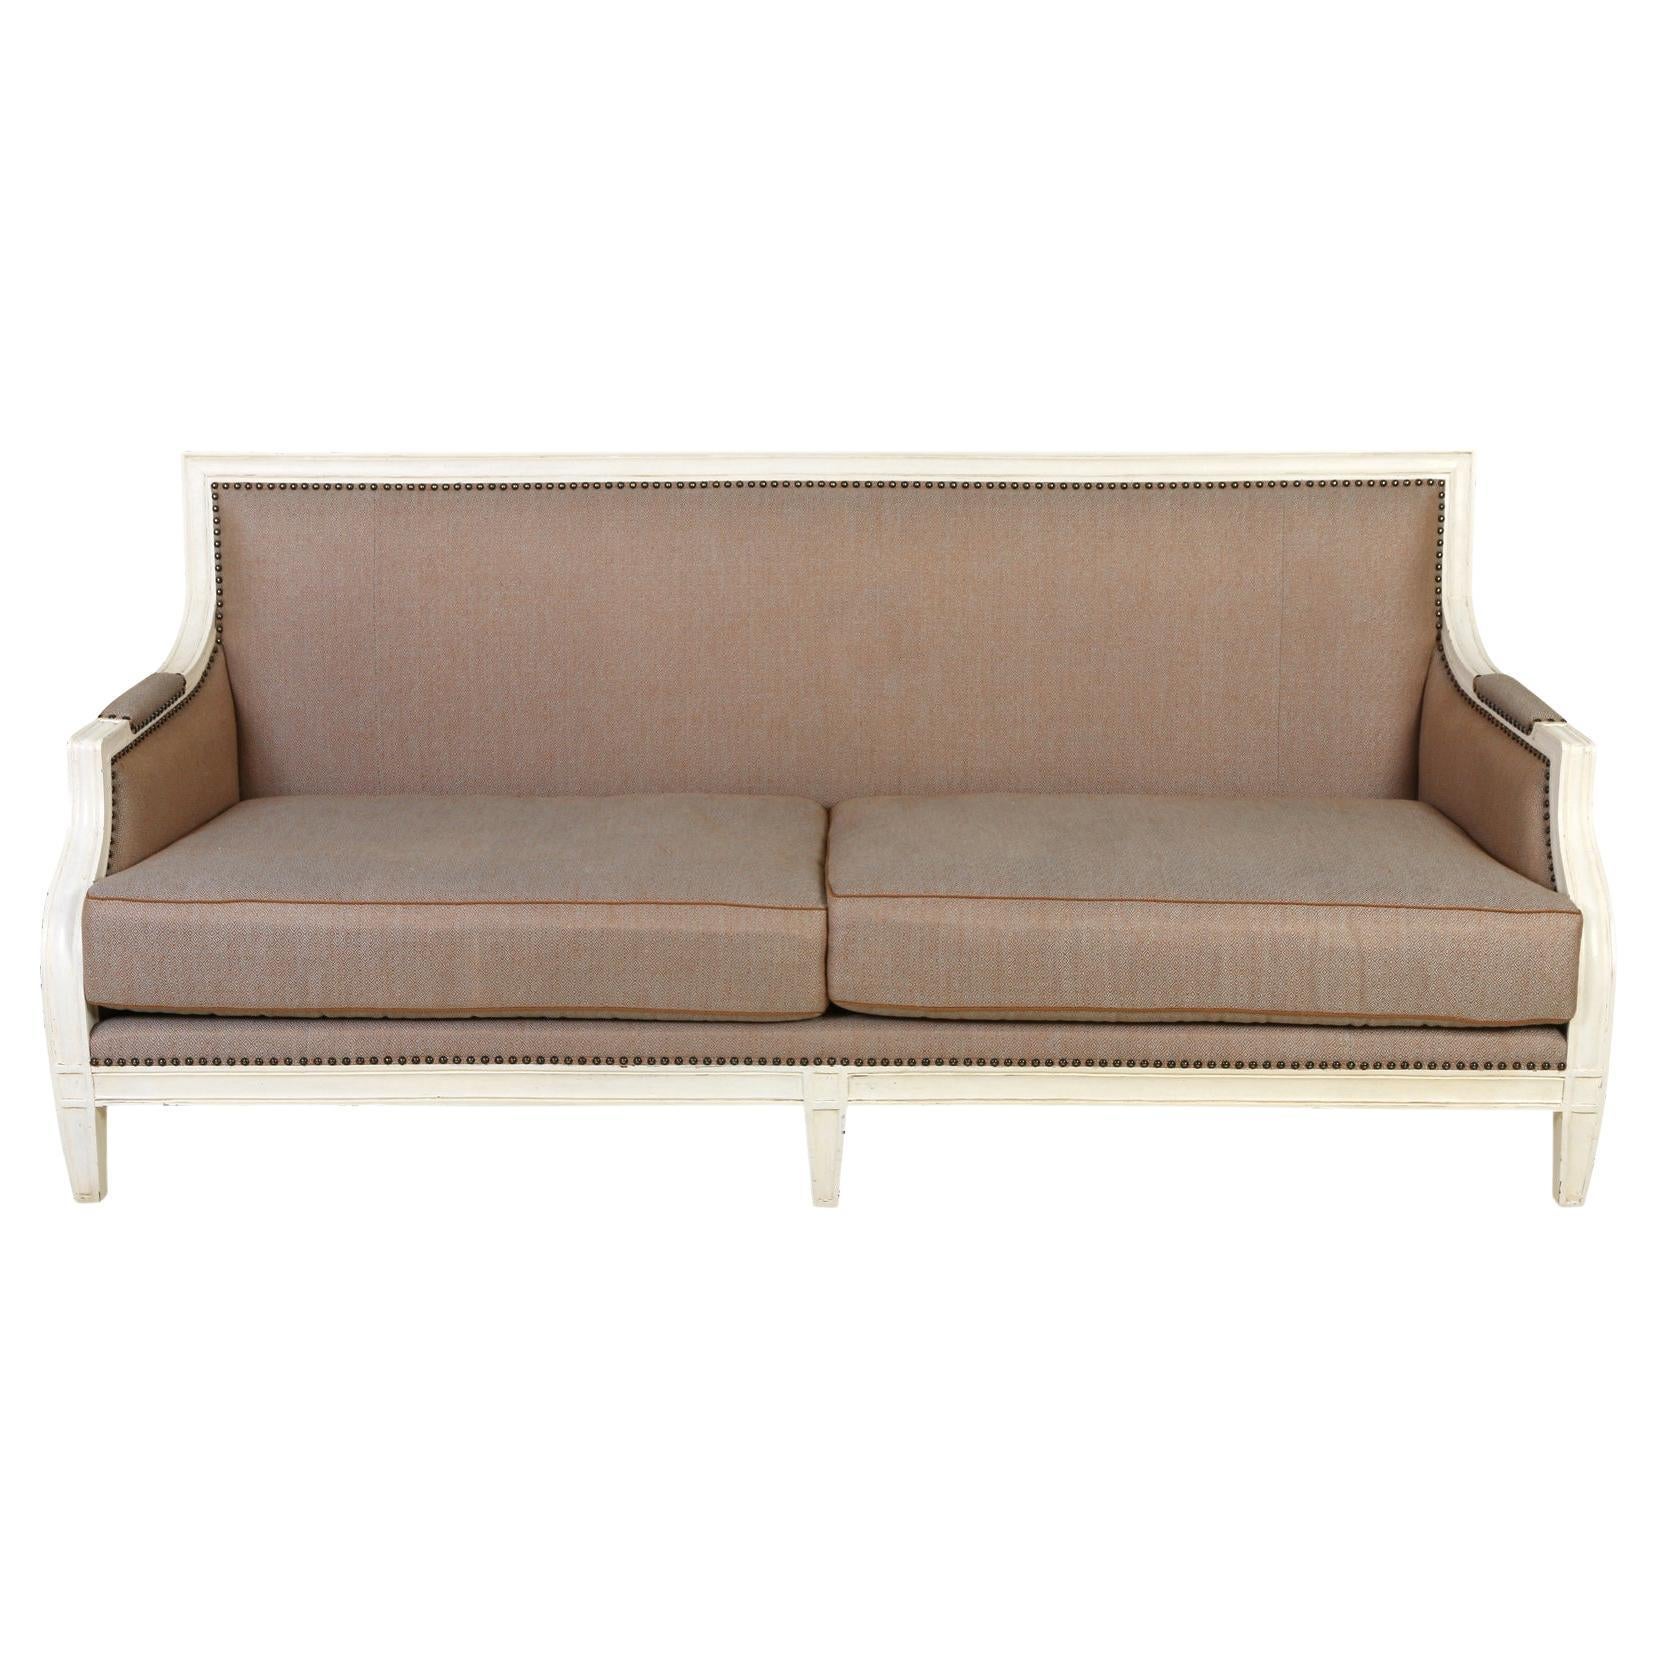 French White Frame Sofa with Beige Upholstery